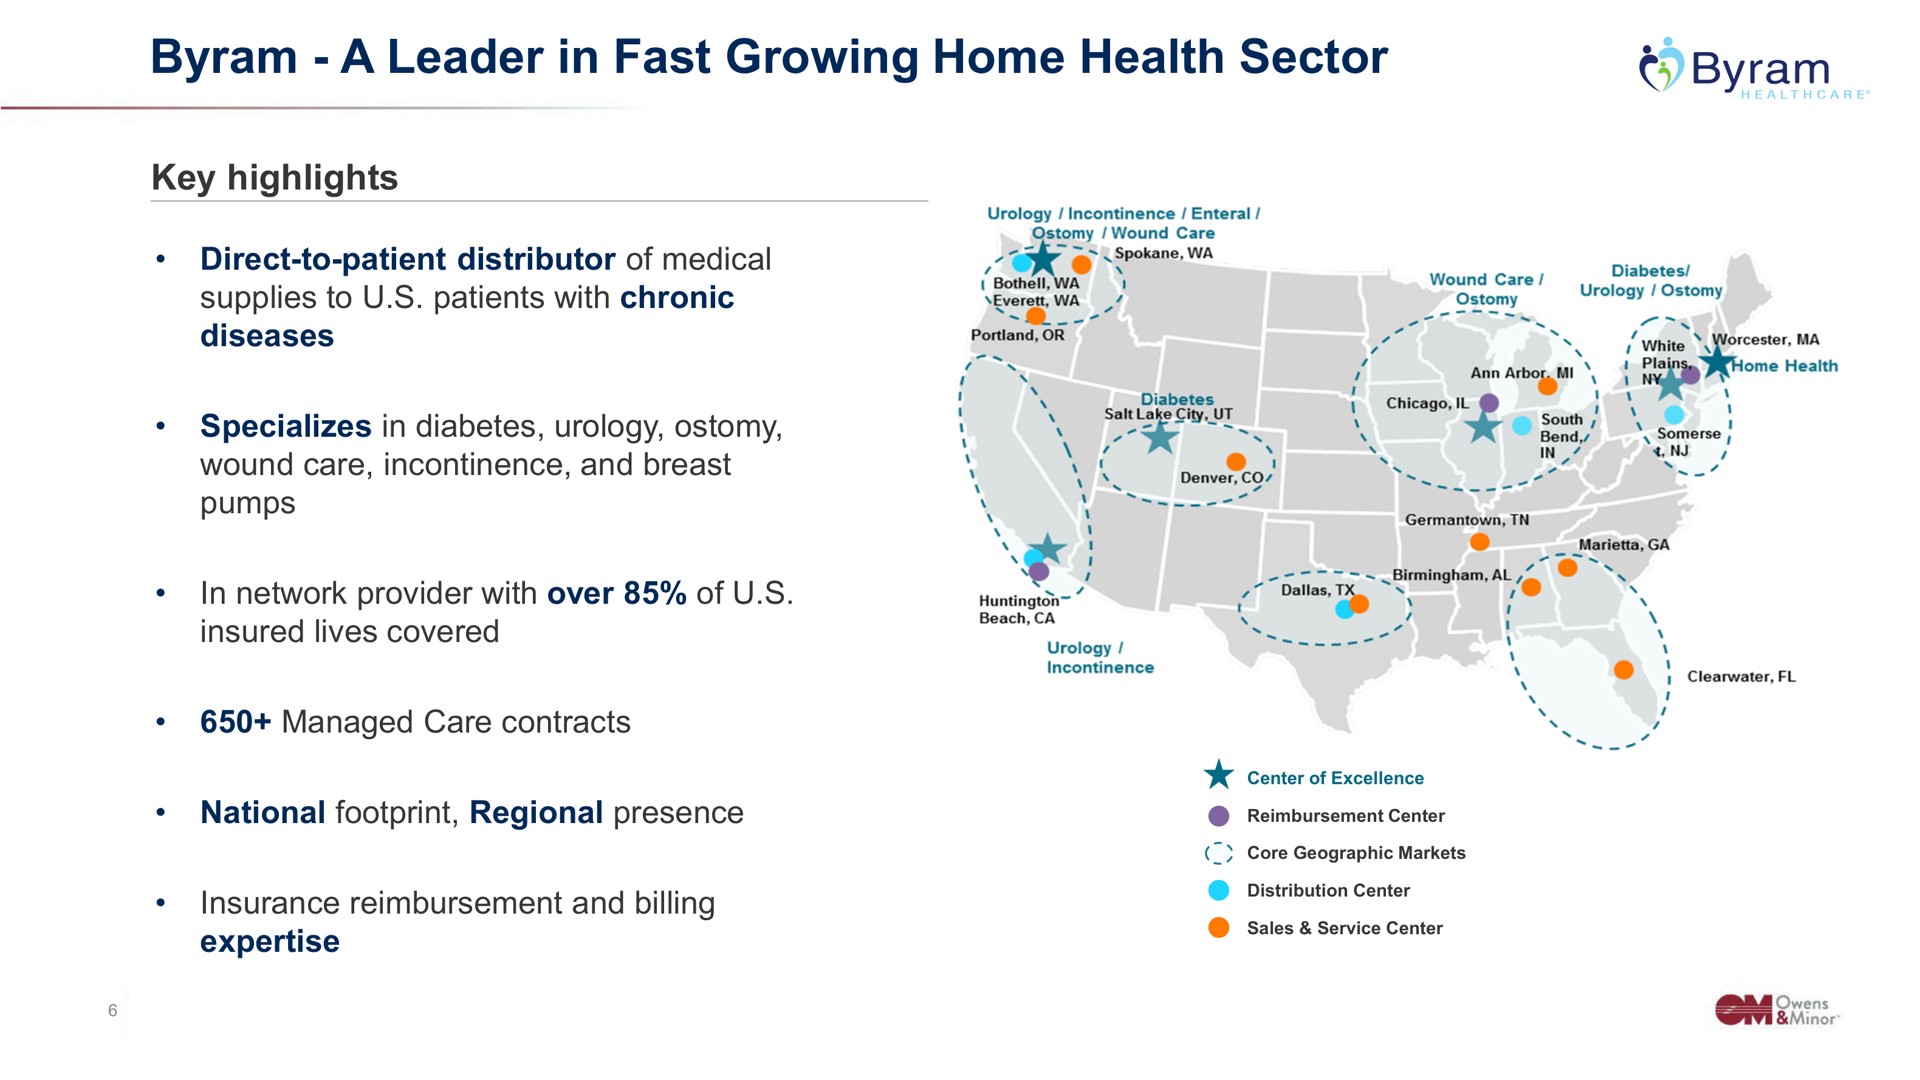 a leader in fast growing home health sector | Owens&Minor